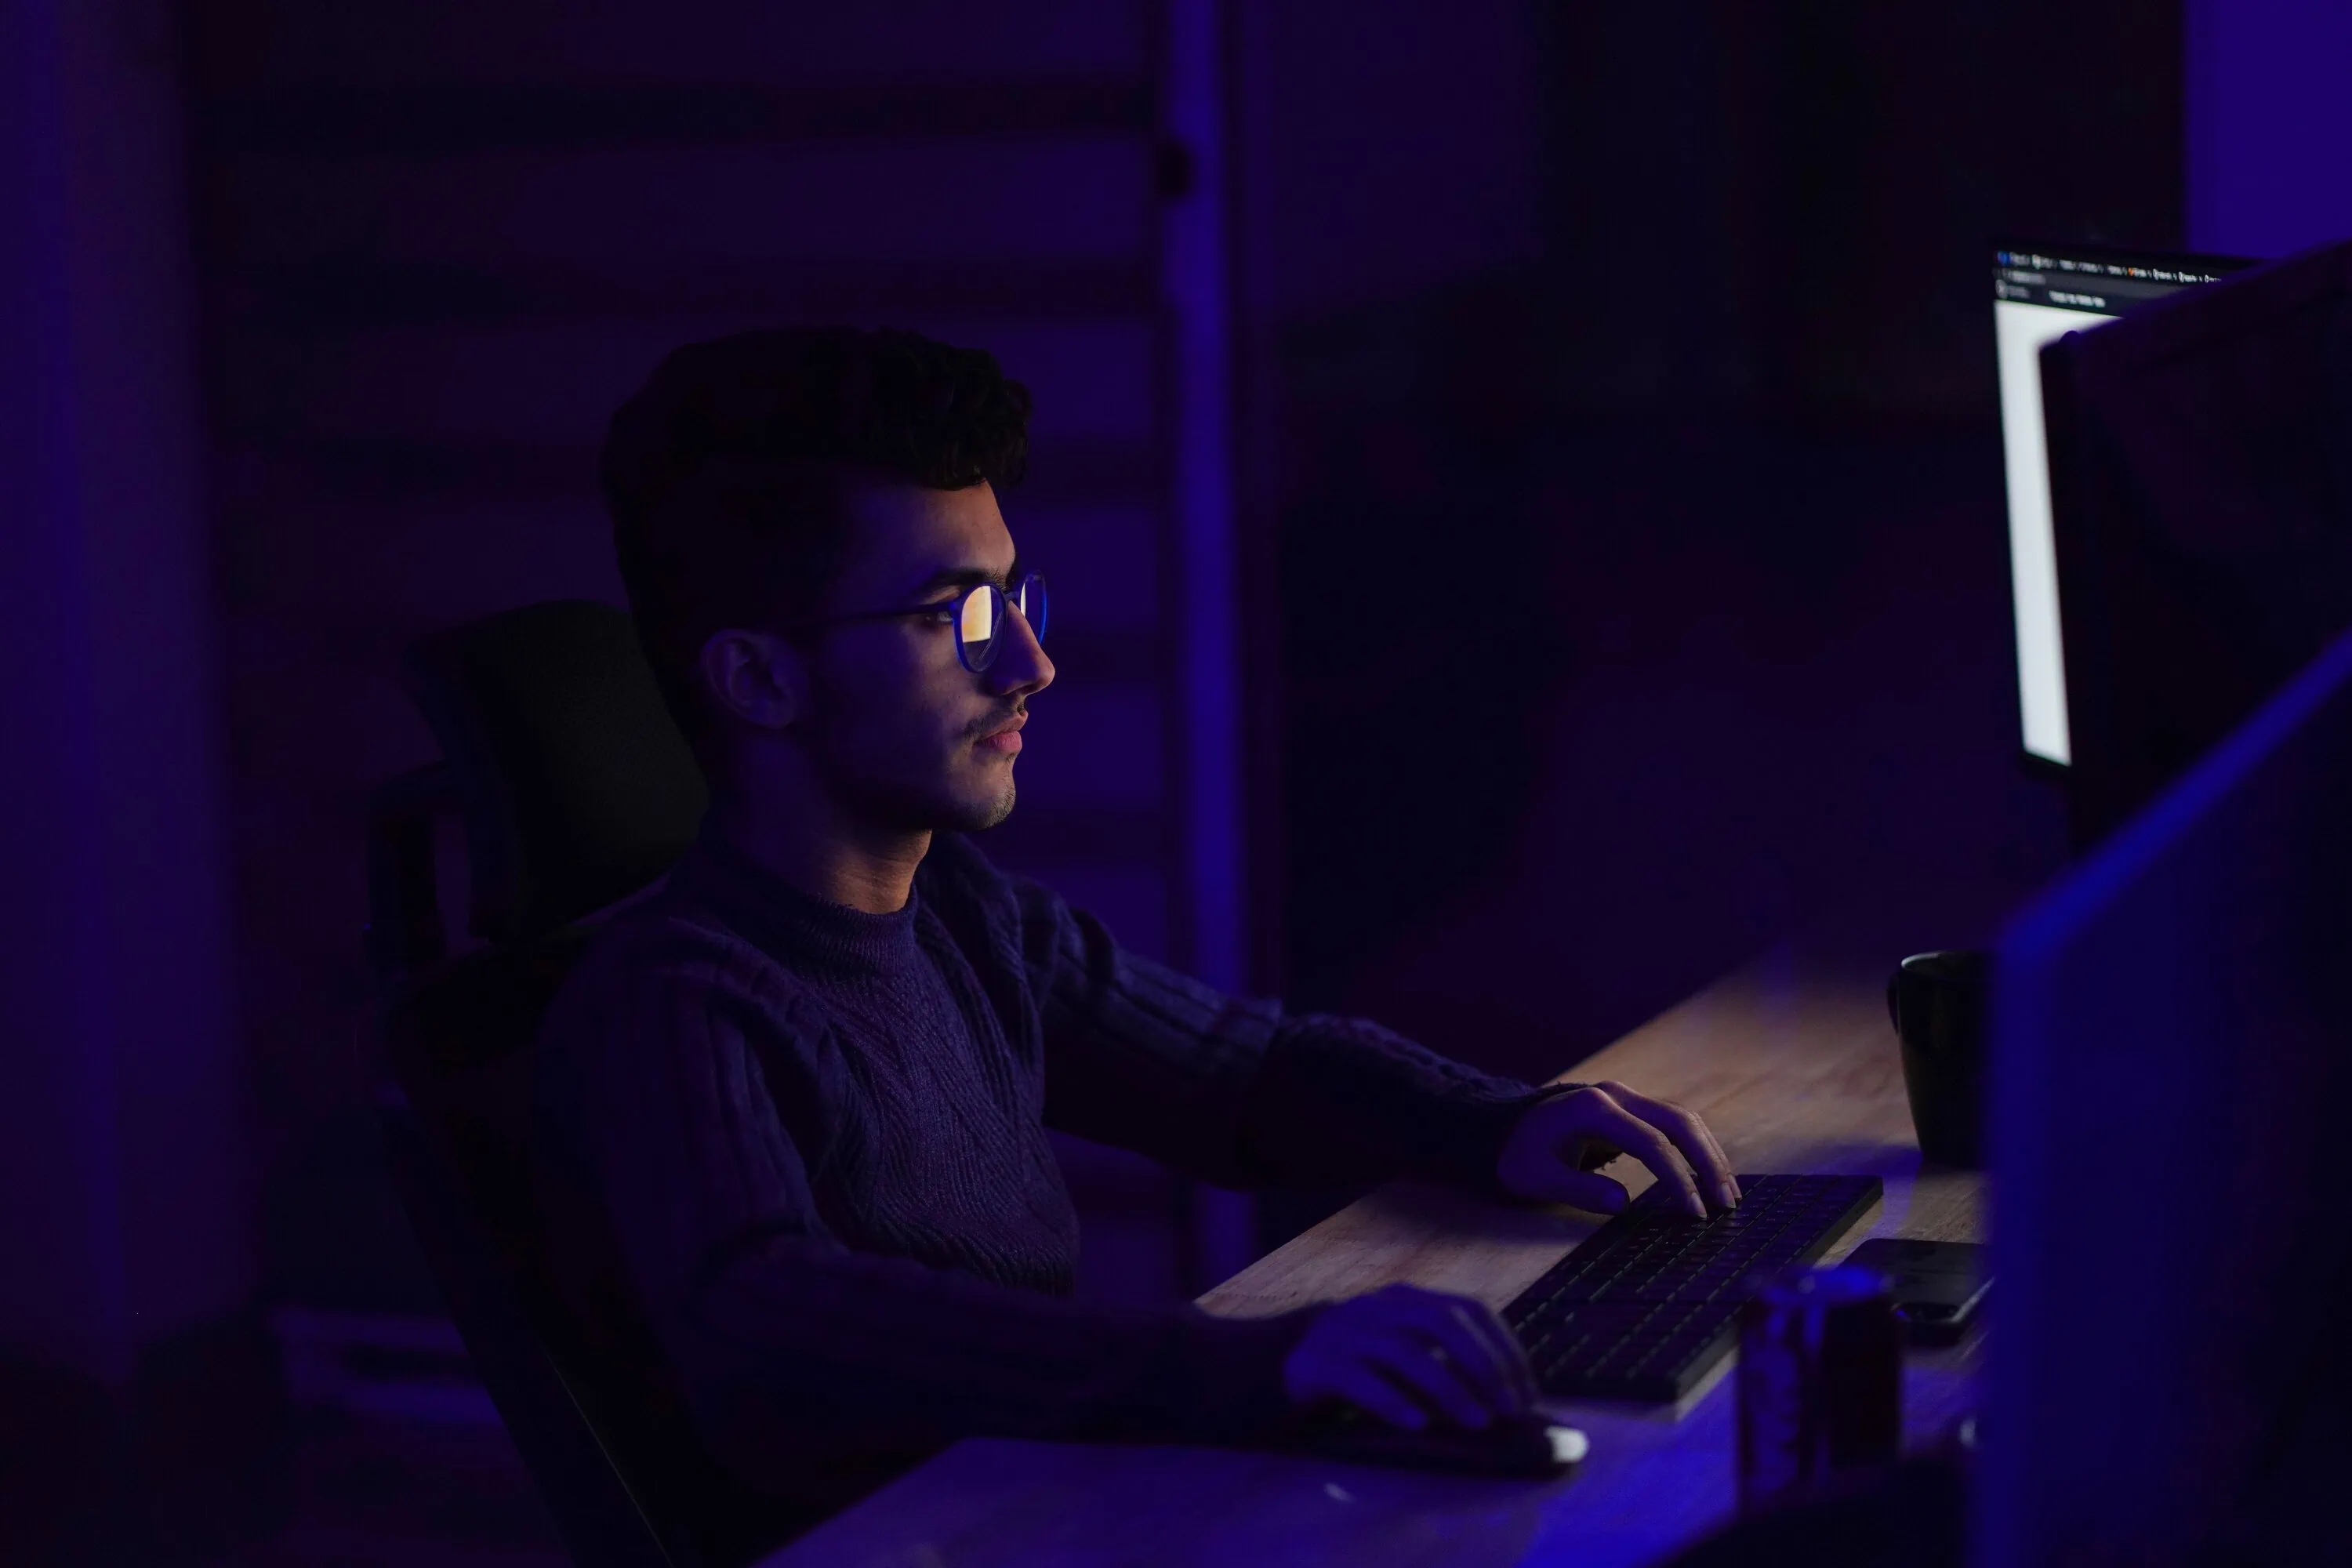 A vCISO working on a computer at night.